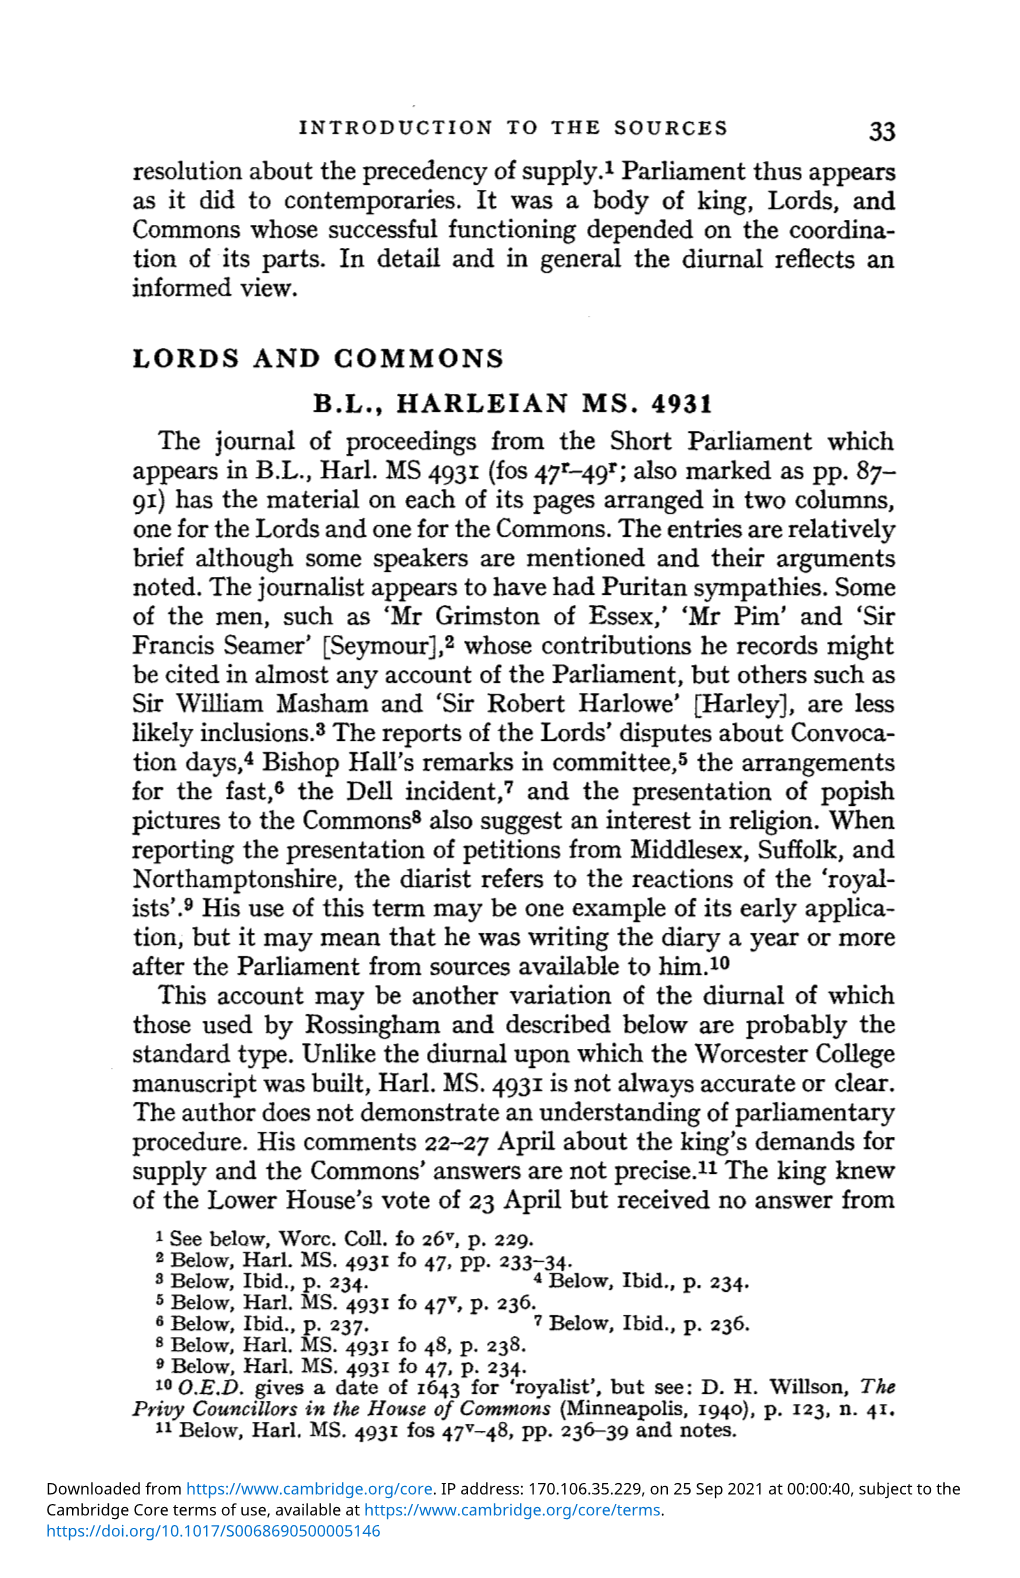 Lords and Commons B.L., Harleian Ms